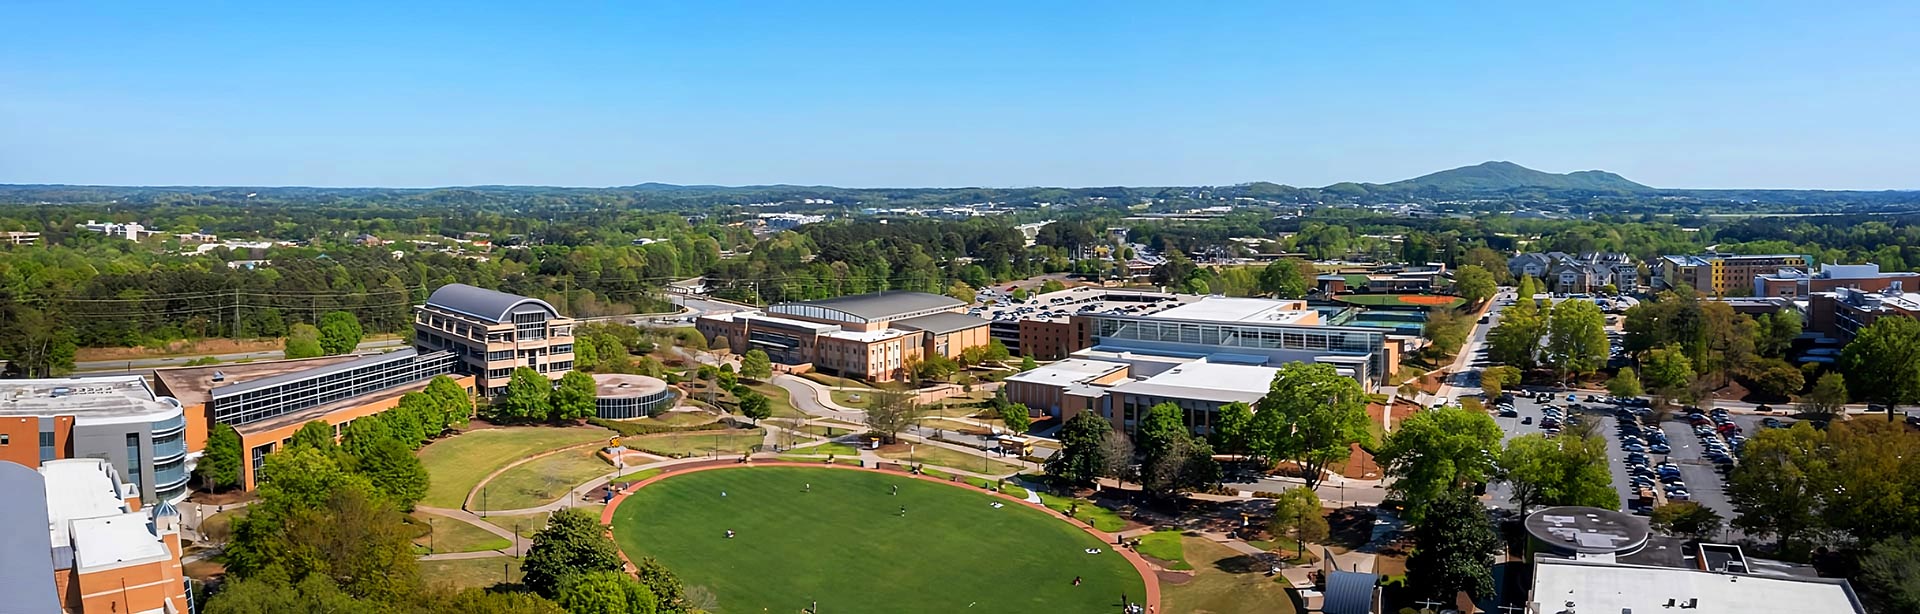 Drone view of Kennesaw Campus.